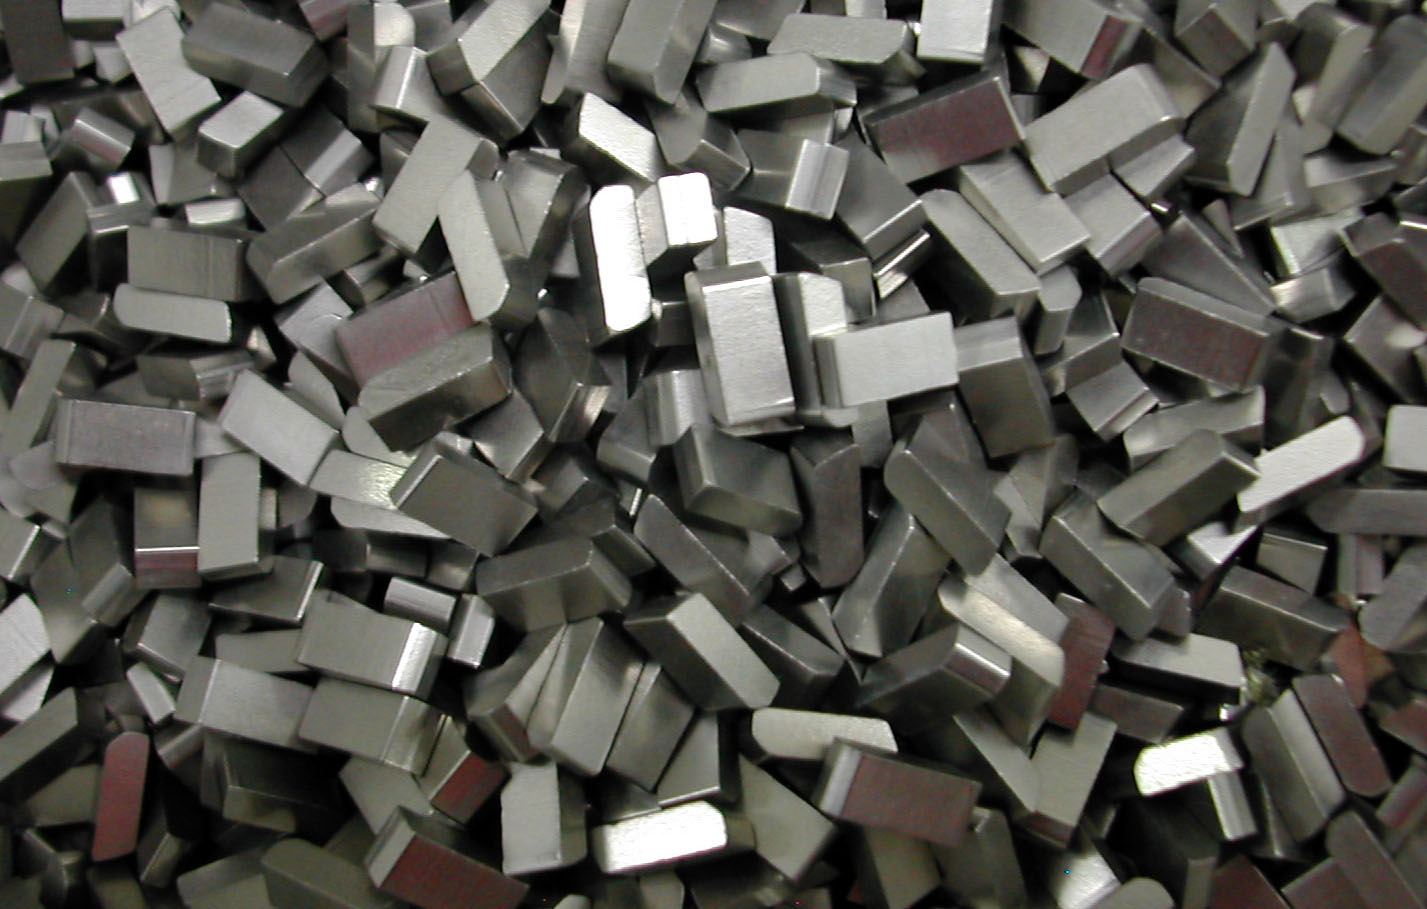 Main Properties of Cemented Tungsten Carbide